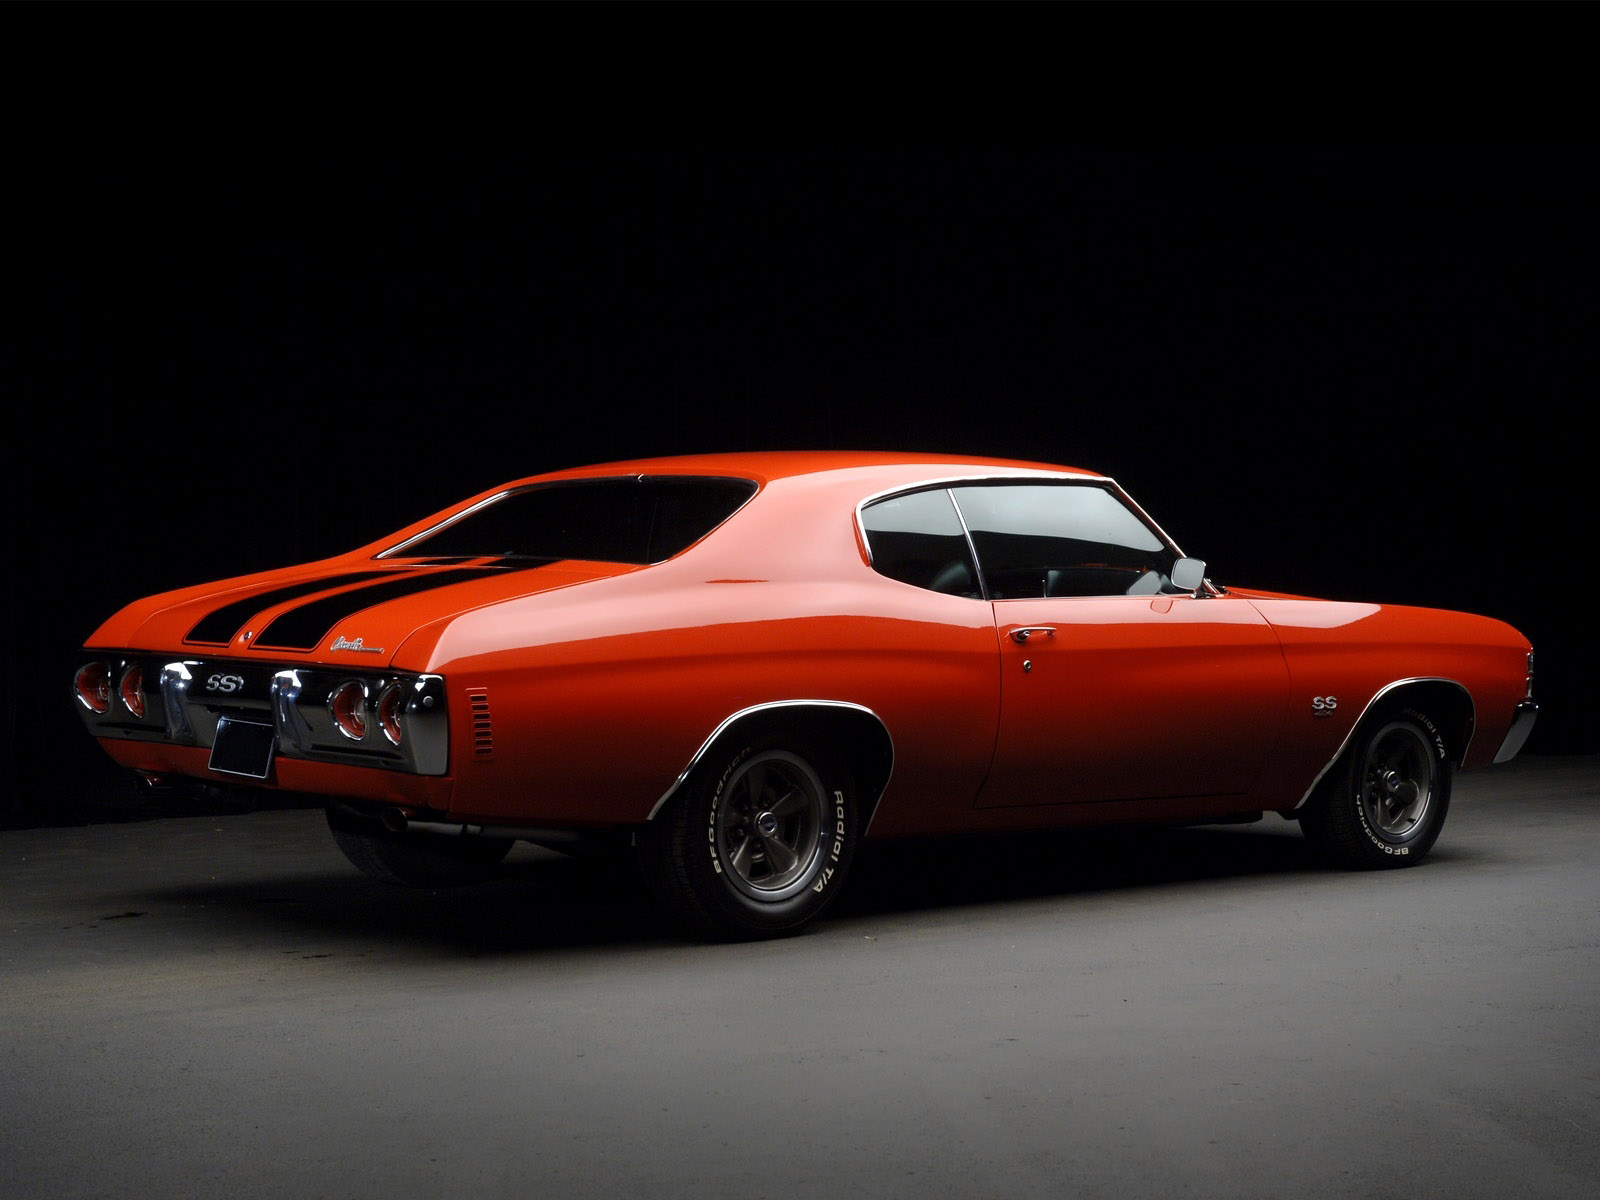 1971 Chevrolet Chevelle S S classic muscle f wallpaper background 1600x1200